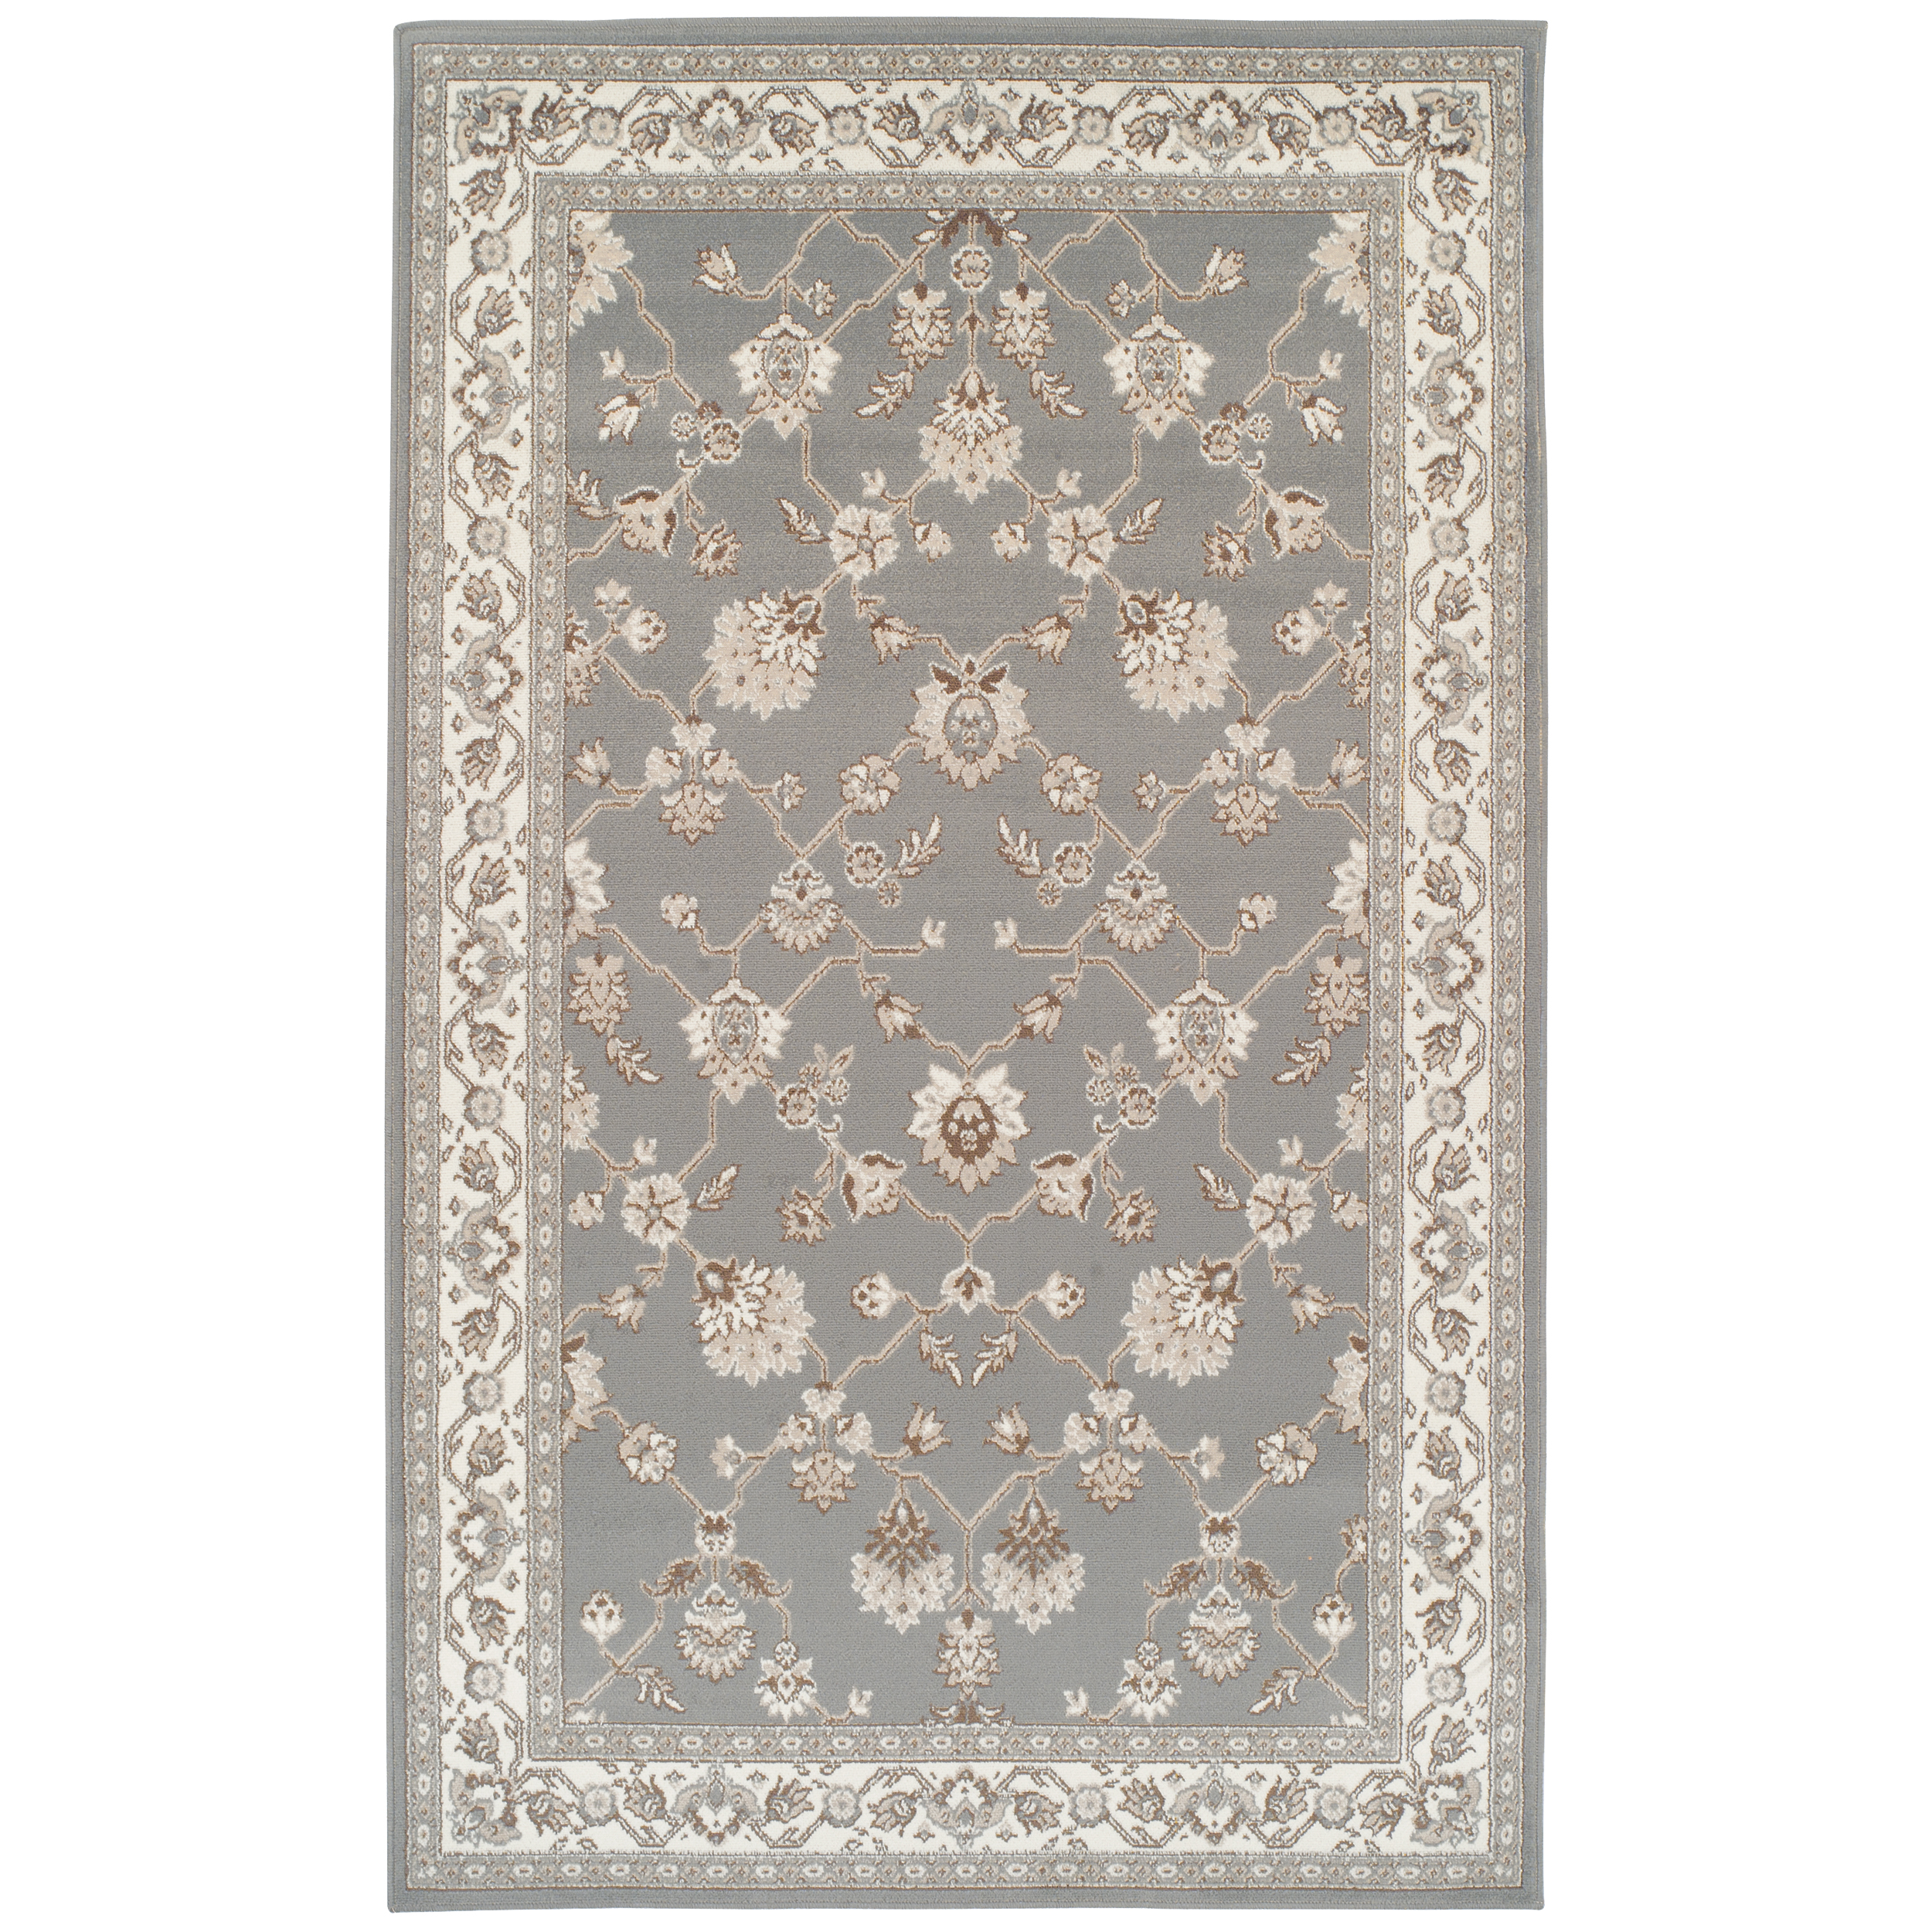 Kingfield Designer Area Rug Collection - image 2 of 5